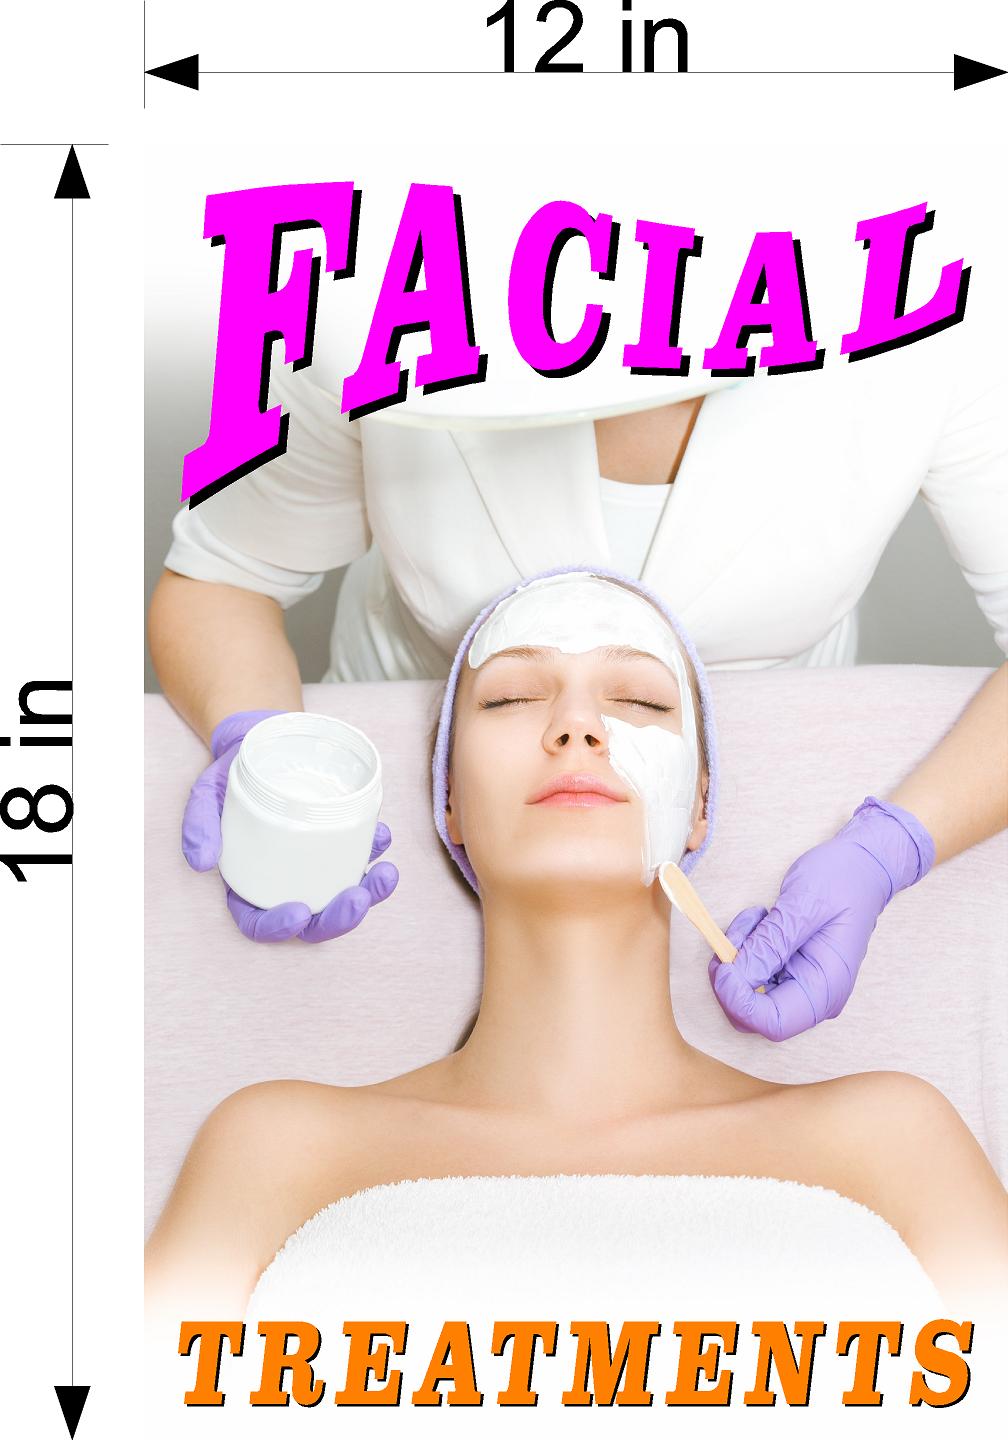 Facial 03 Wallpaper Poster Decal with Adhesive Backing Wall Sticker Decor Vertical